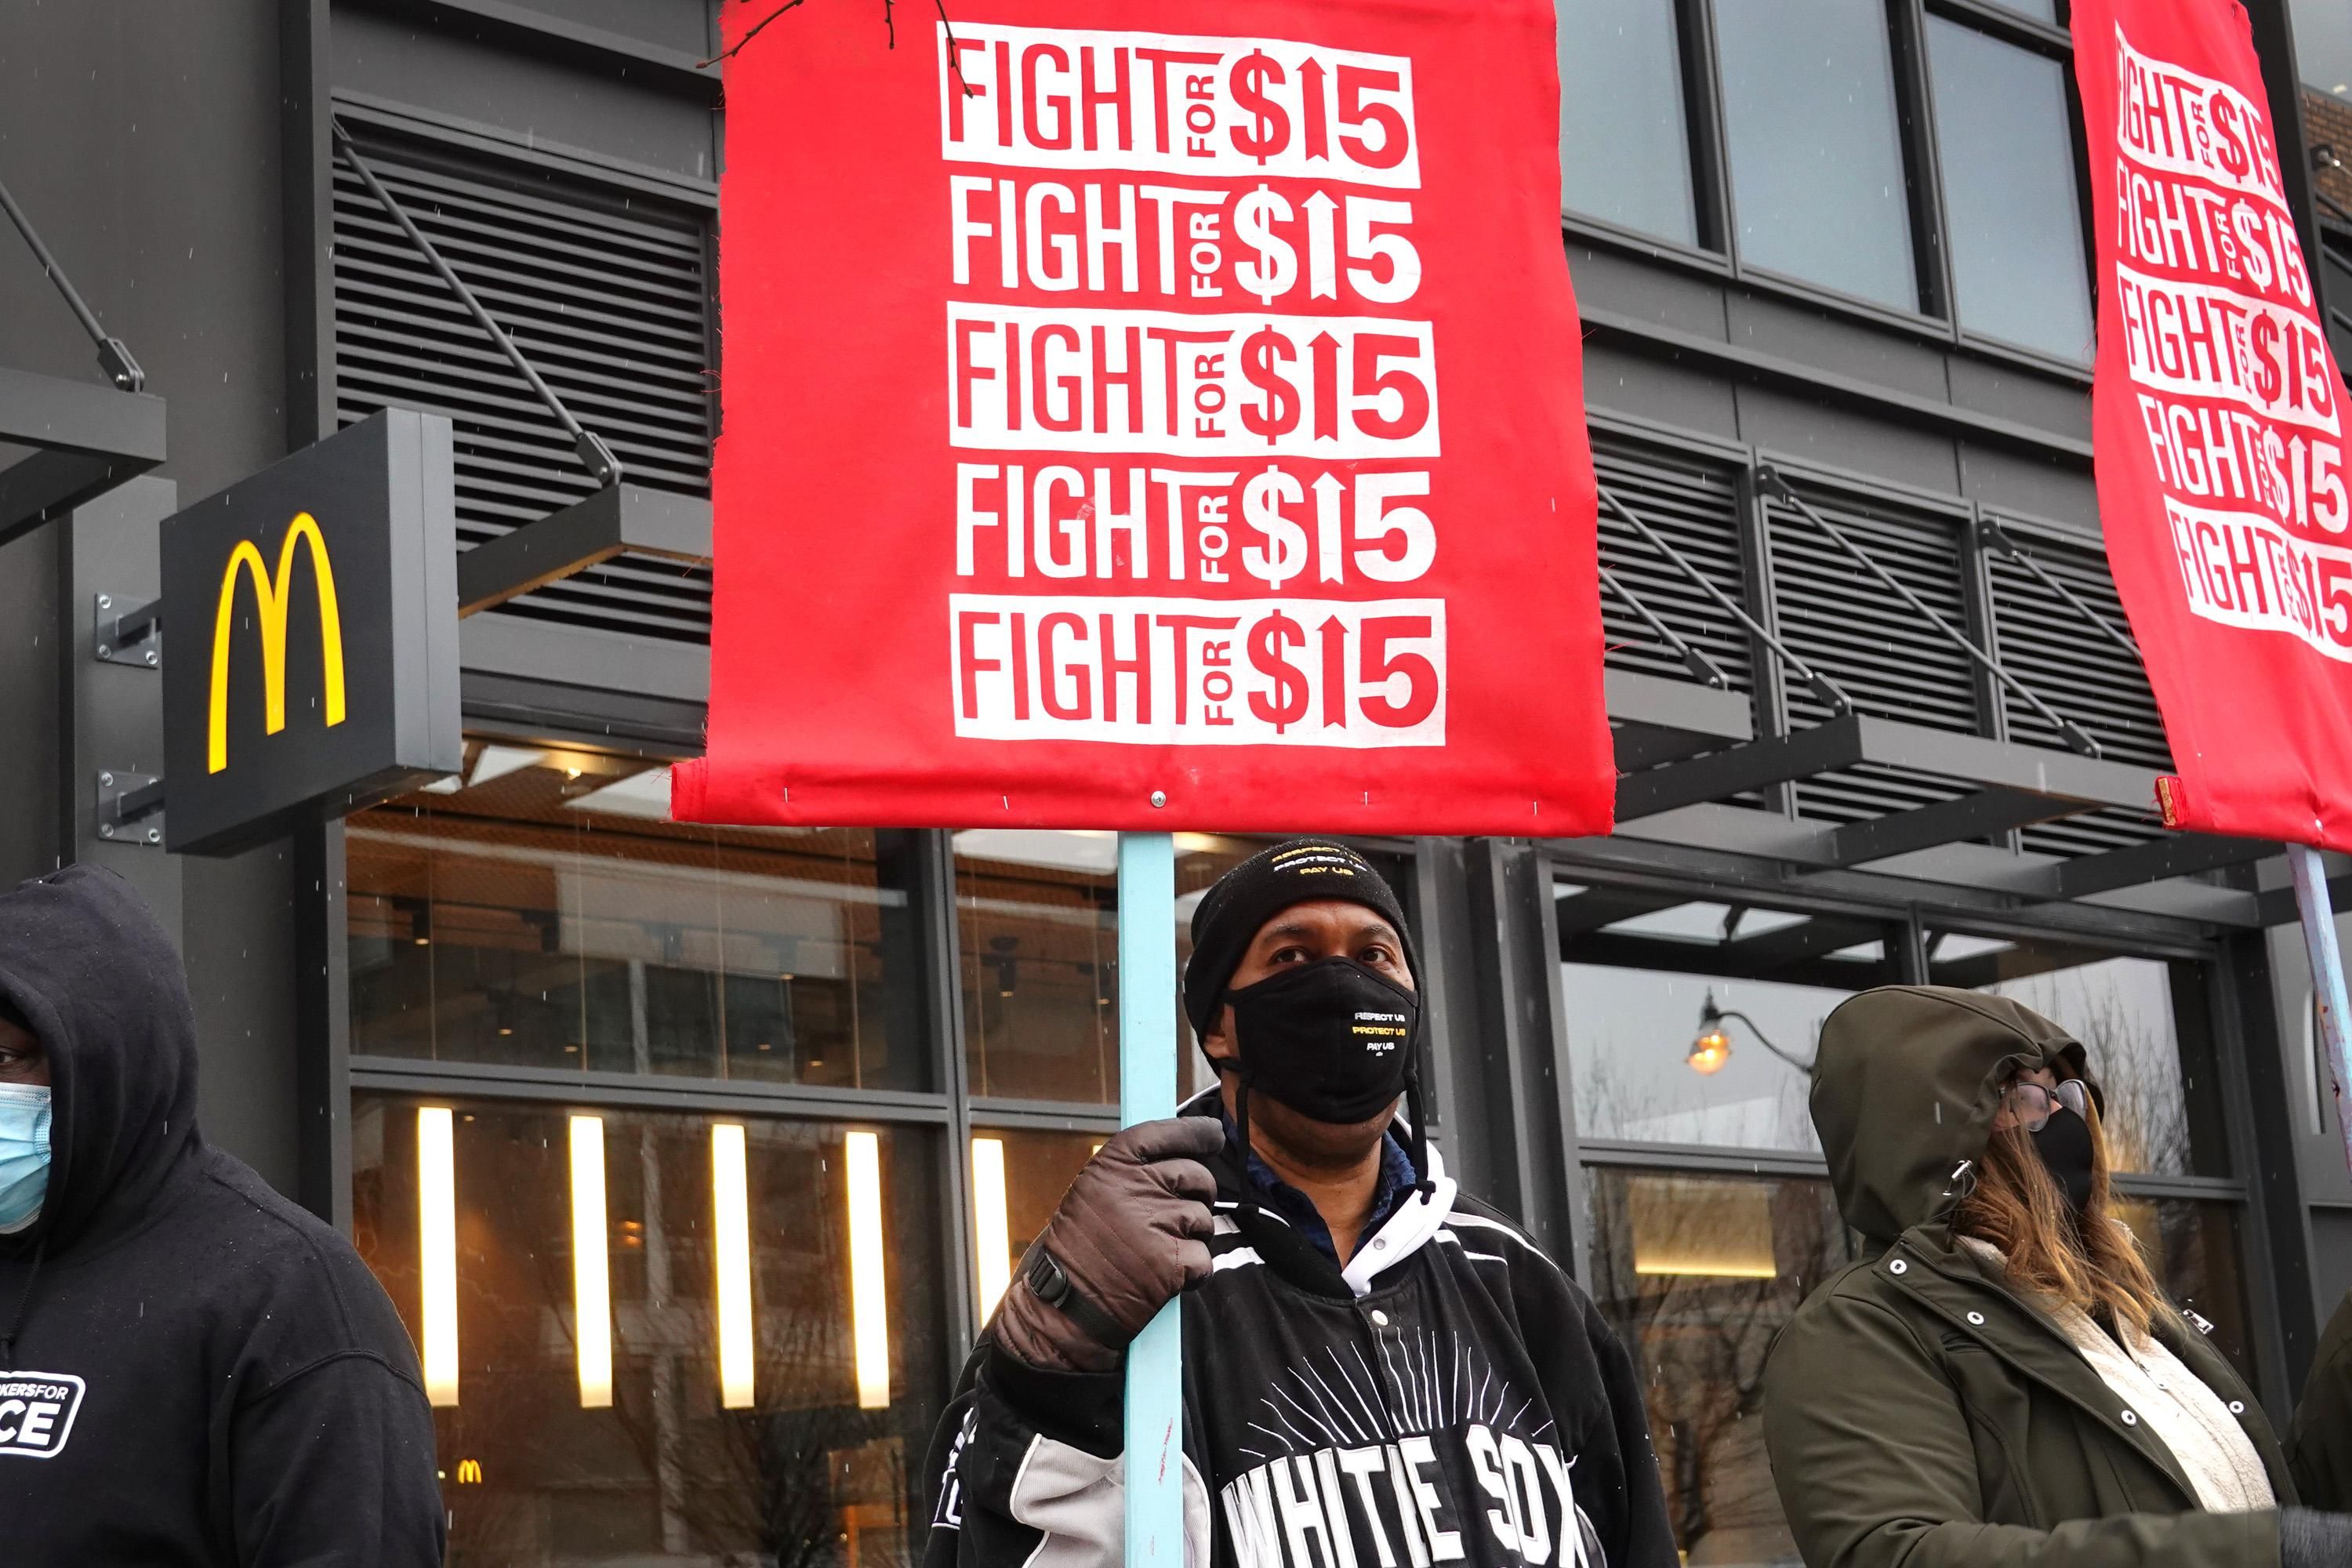 Demonstrators gathered outside of McDonald's corporate headquarters on January 15, 2021 in Chicago. The protest was part of a nationwide effort calling for the minimum wage to be raised to $15-per-hour. (Photo: Scott Olson/Getty Images)